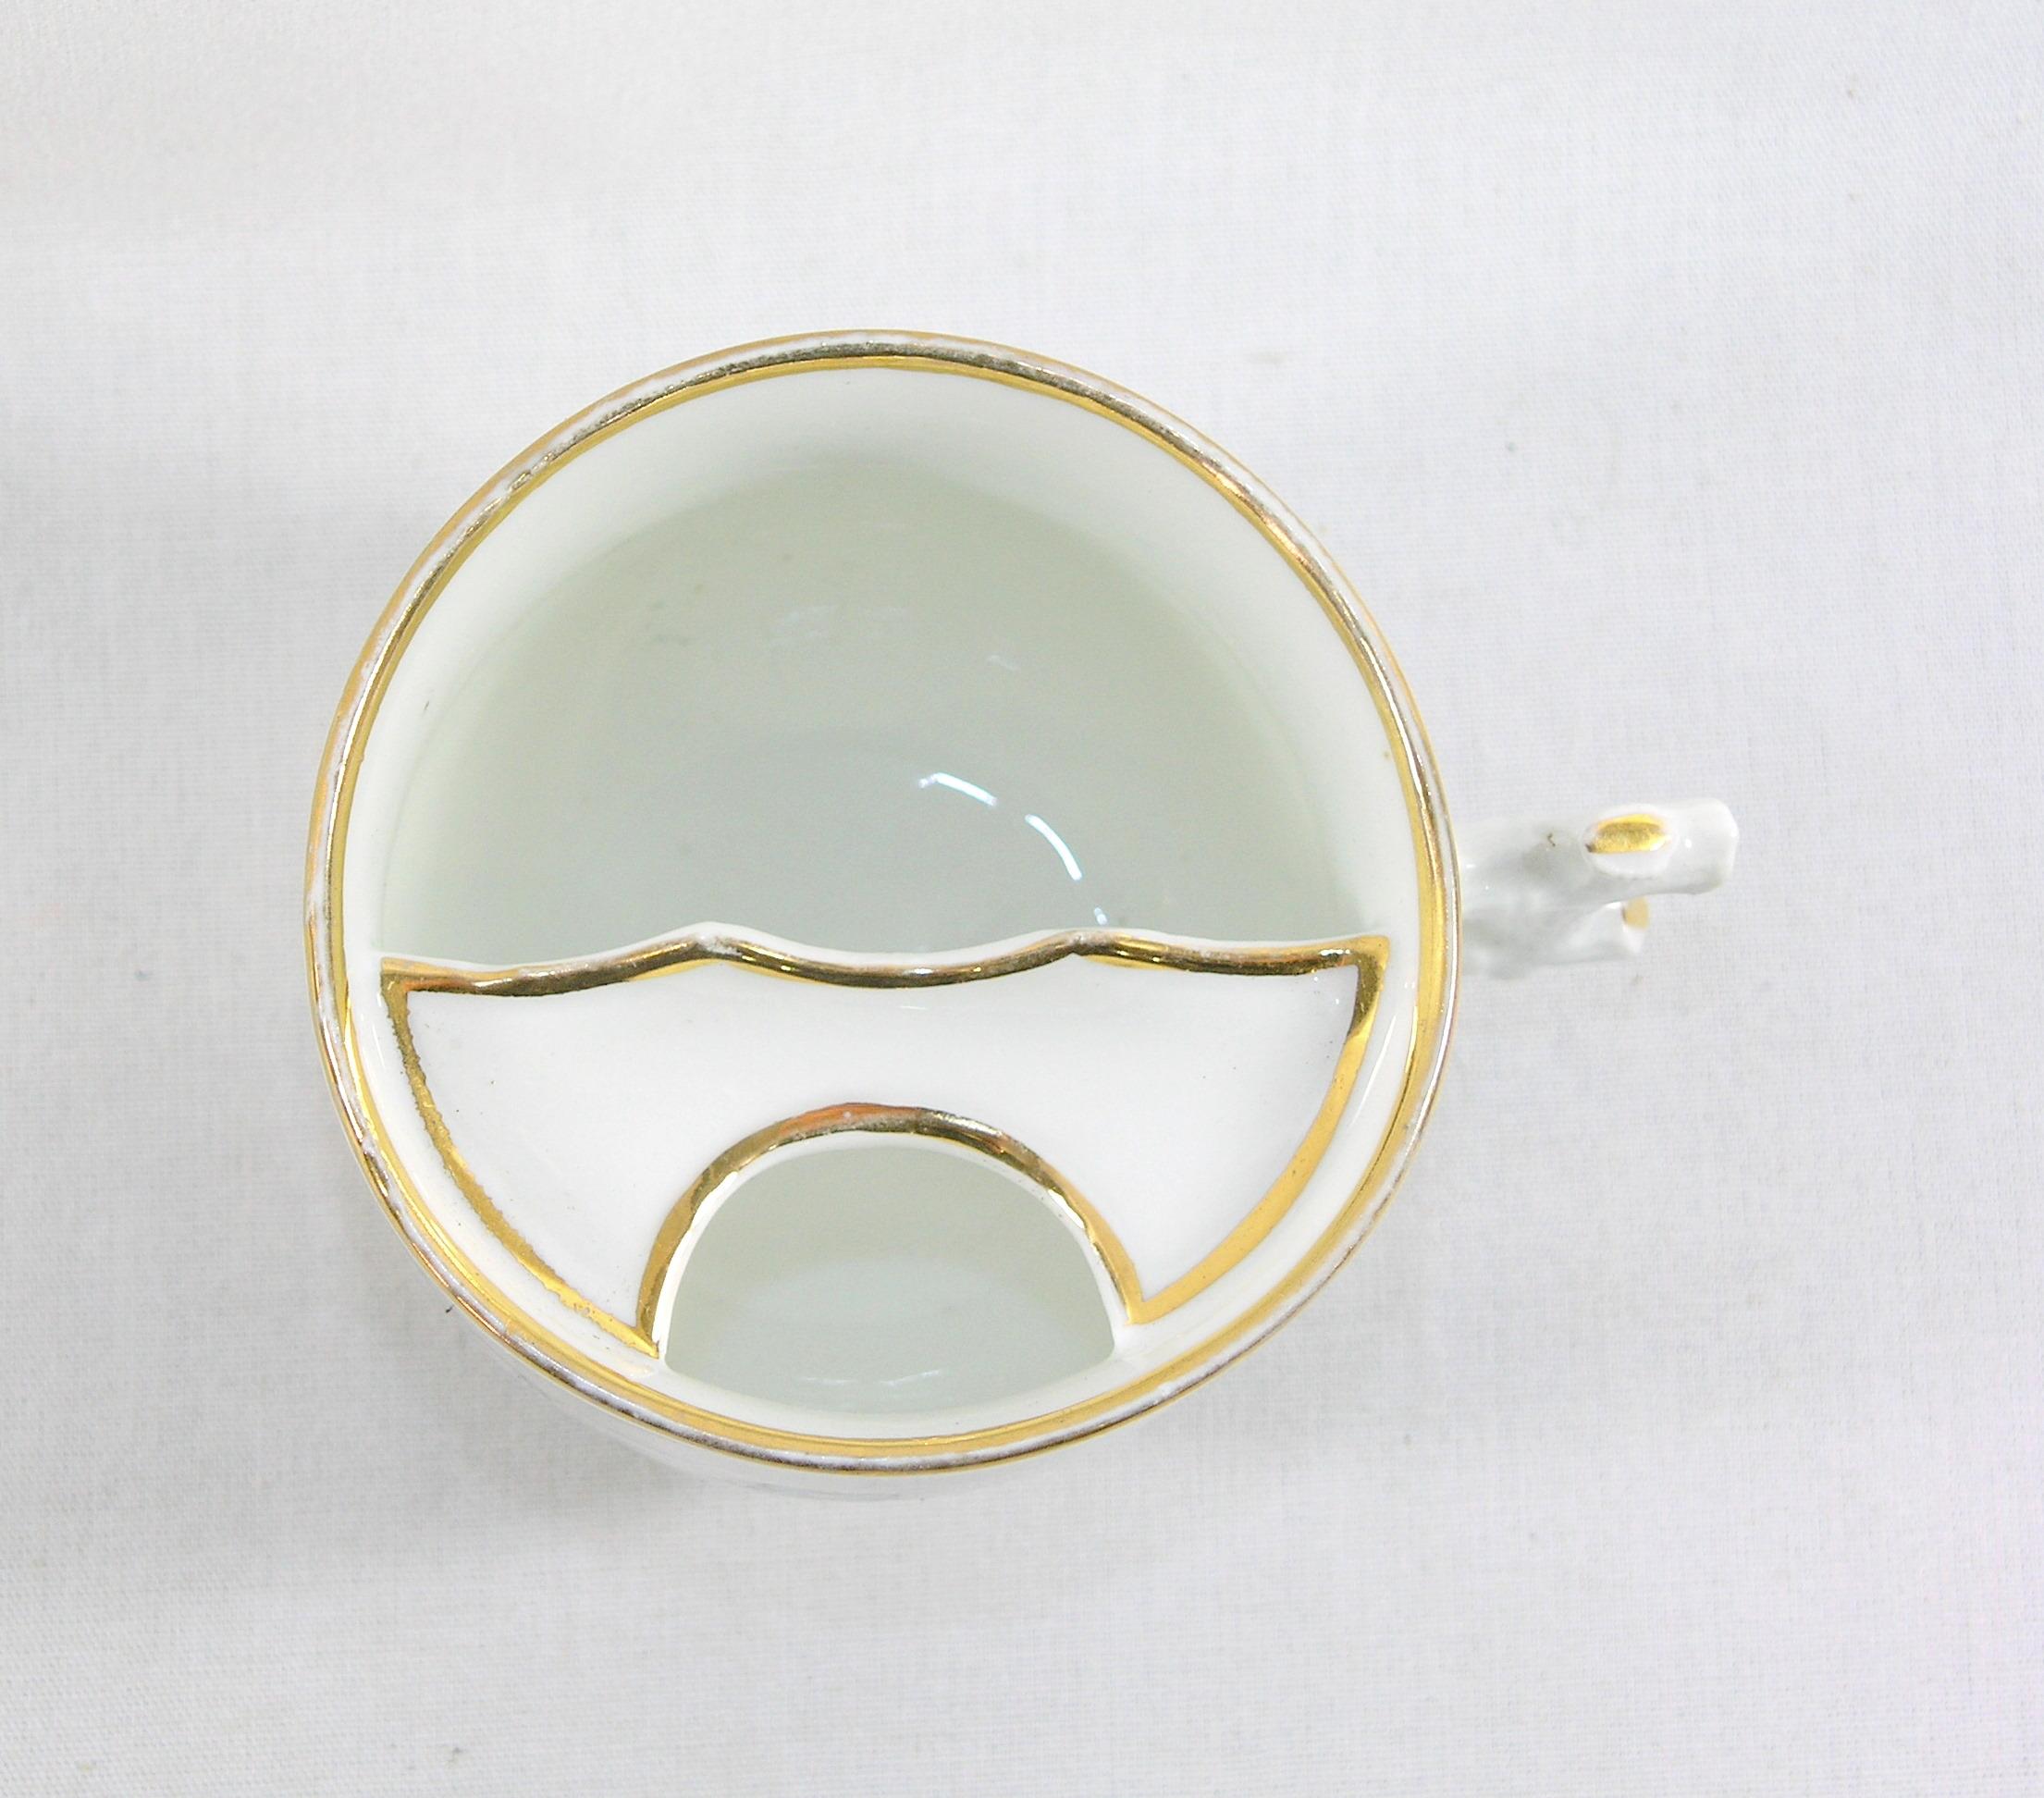 Vintage Flowered "Think of Me" Mustache Mug. Manufactured in Germany.